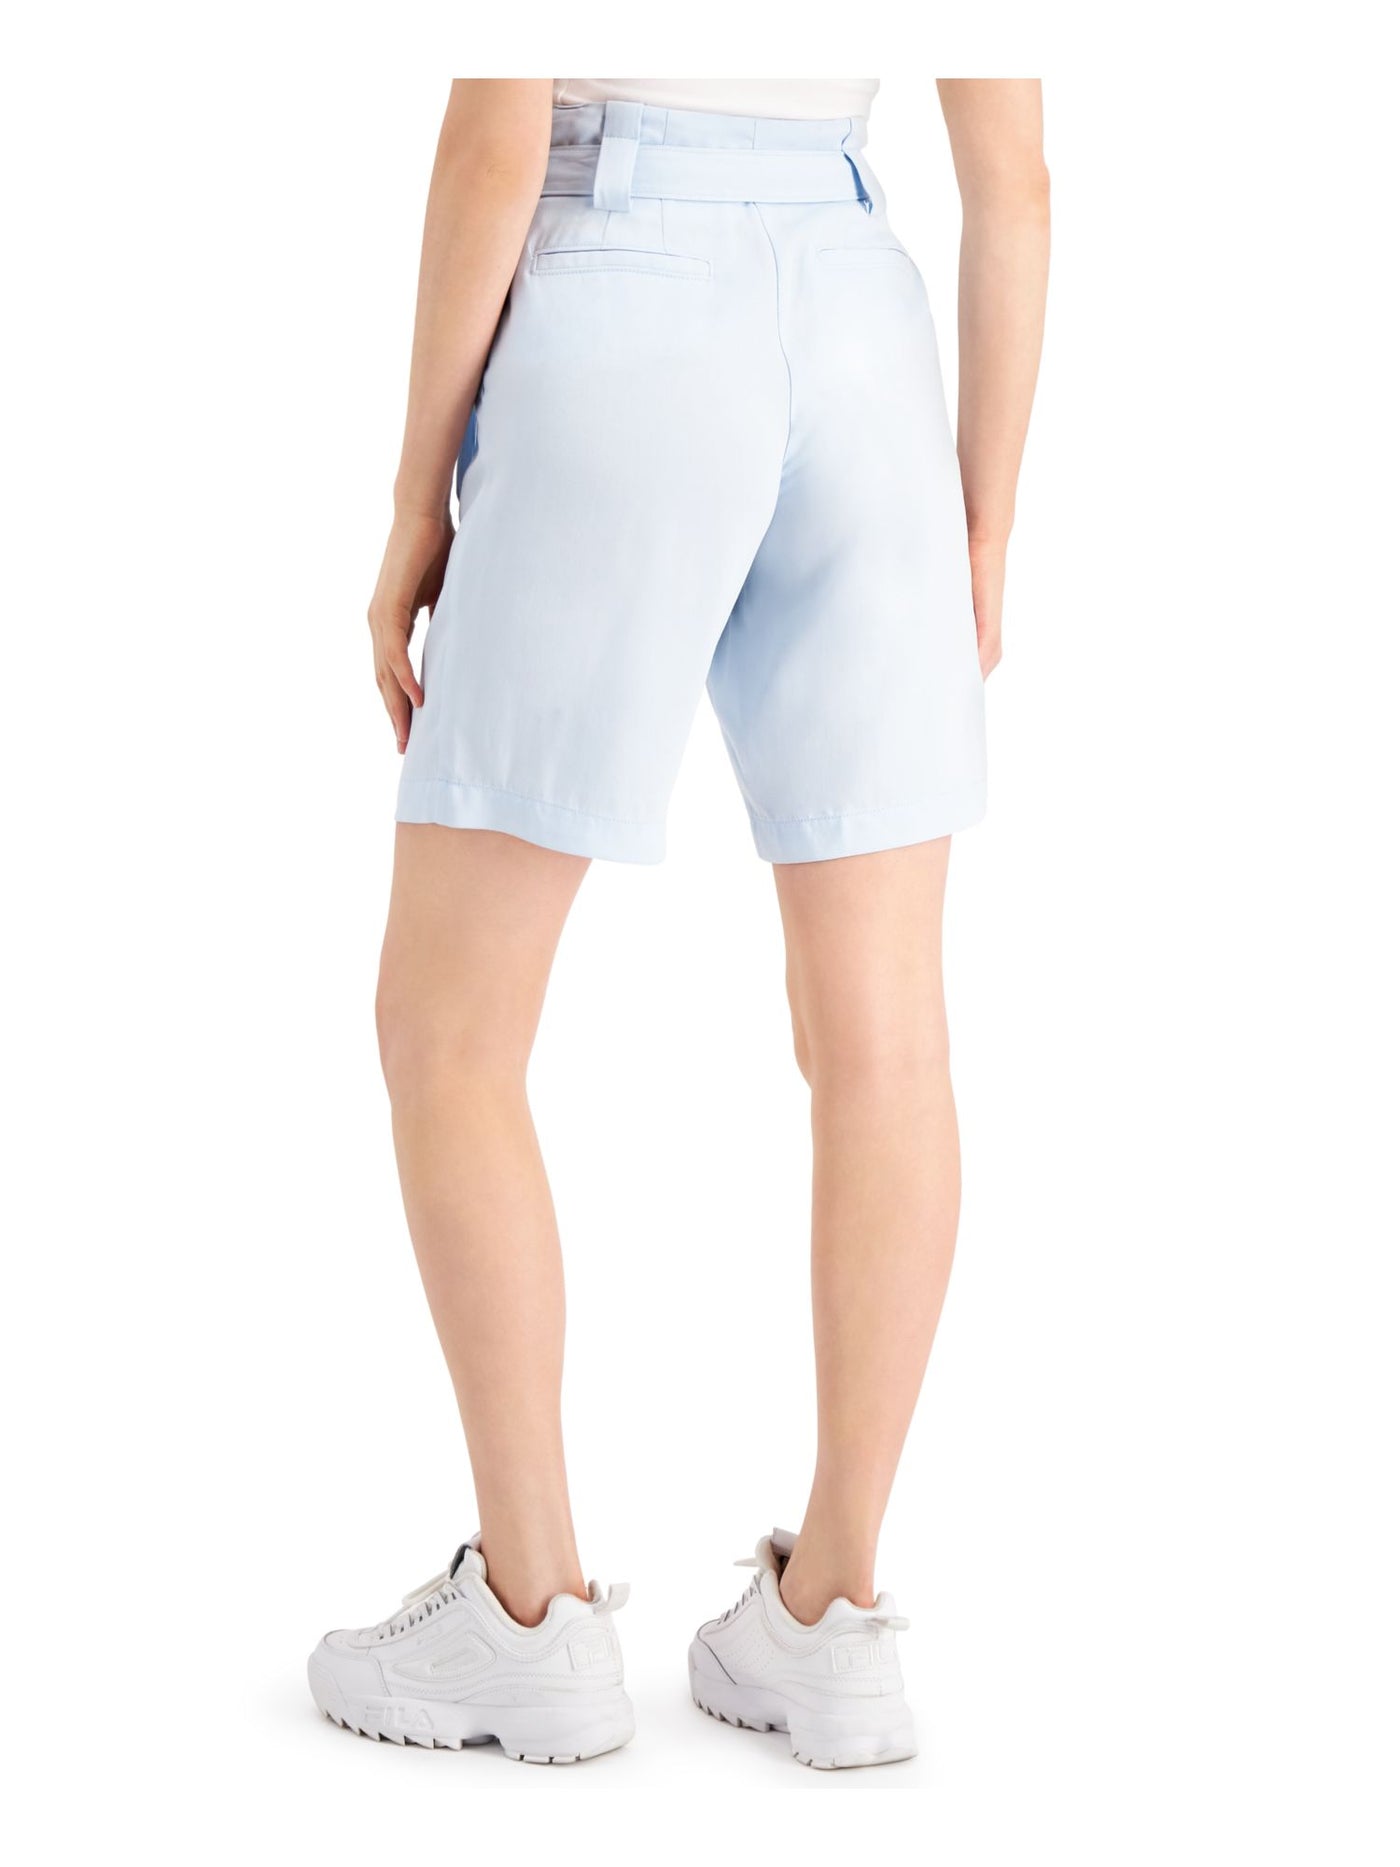 GUESS Womens Light Blue Pocketed Zippered Pleated Paper-bag Belted Bermuda Shorts 4